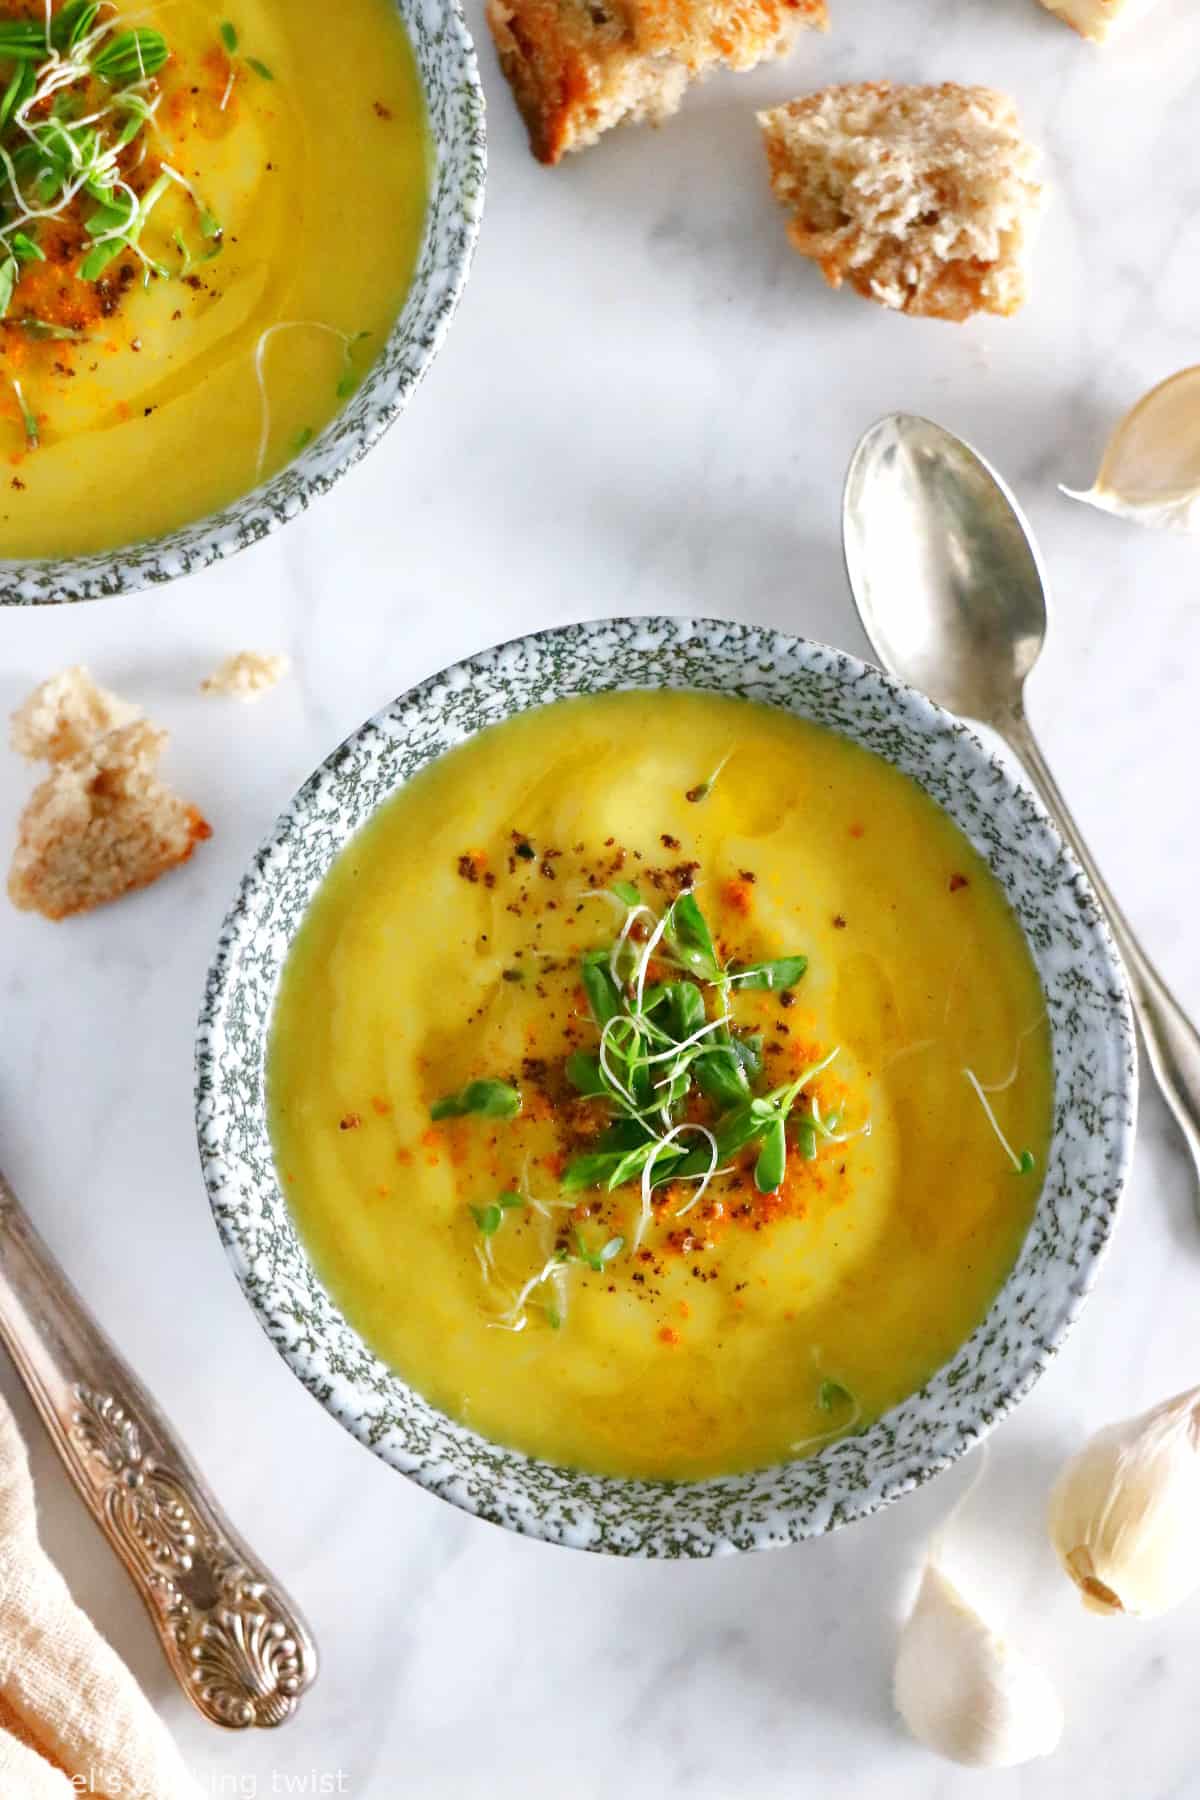 Easy and delicious curried leek potato soup, prepared with 5 ingredients only, and packed with warm, comforting flavors.